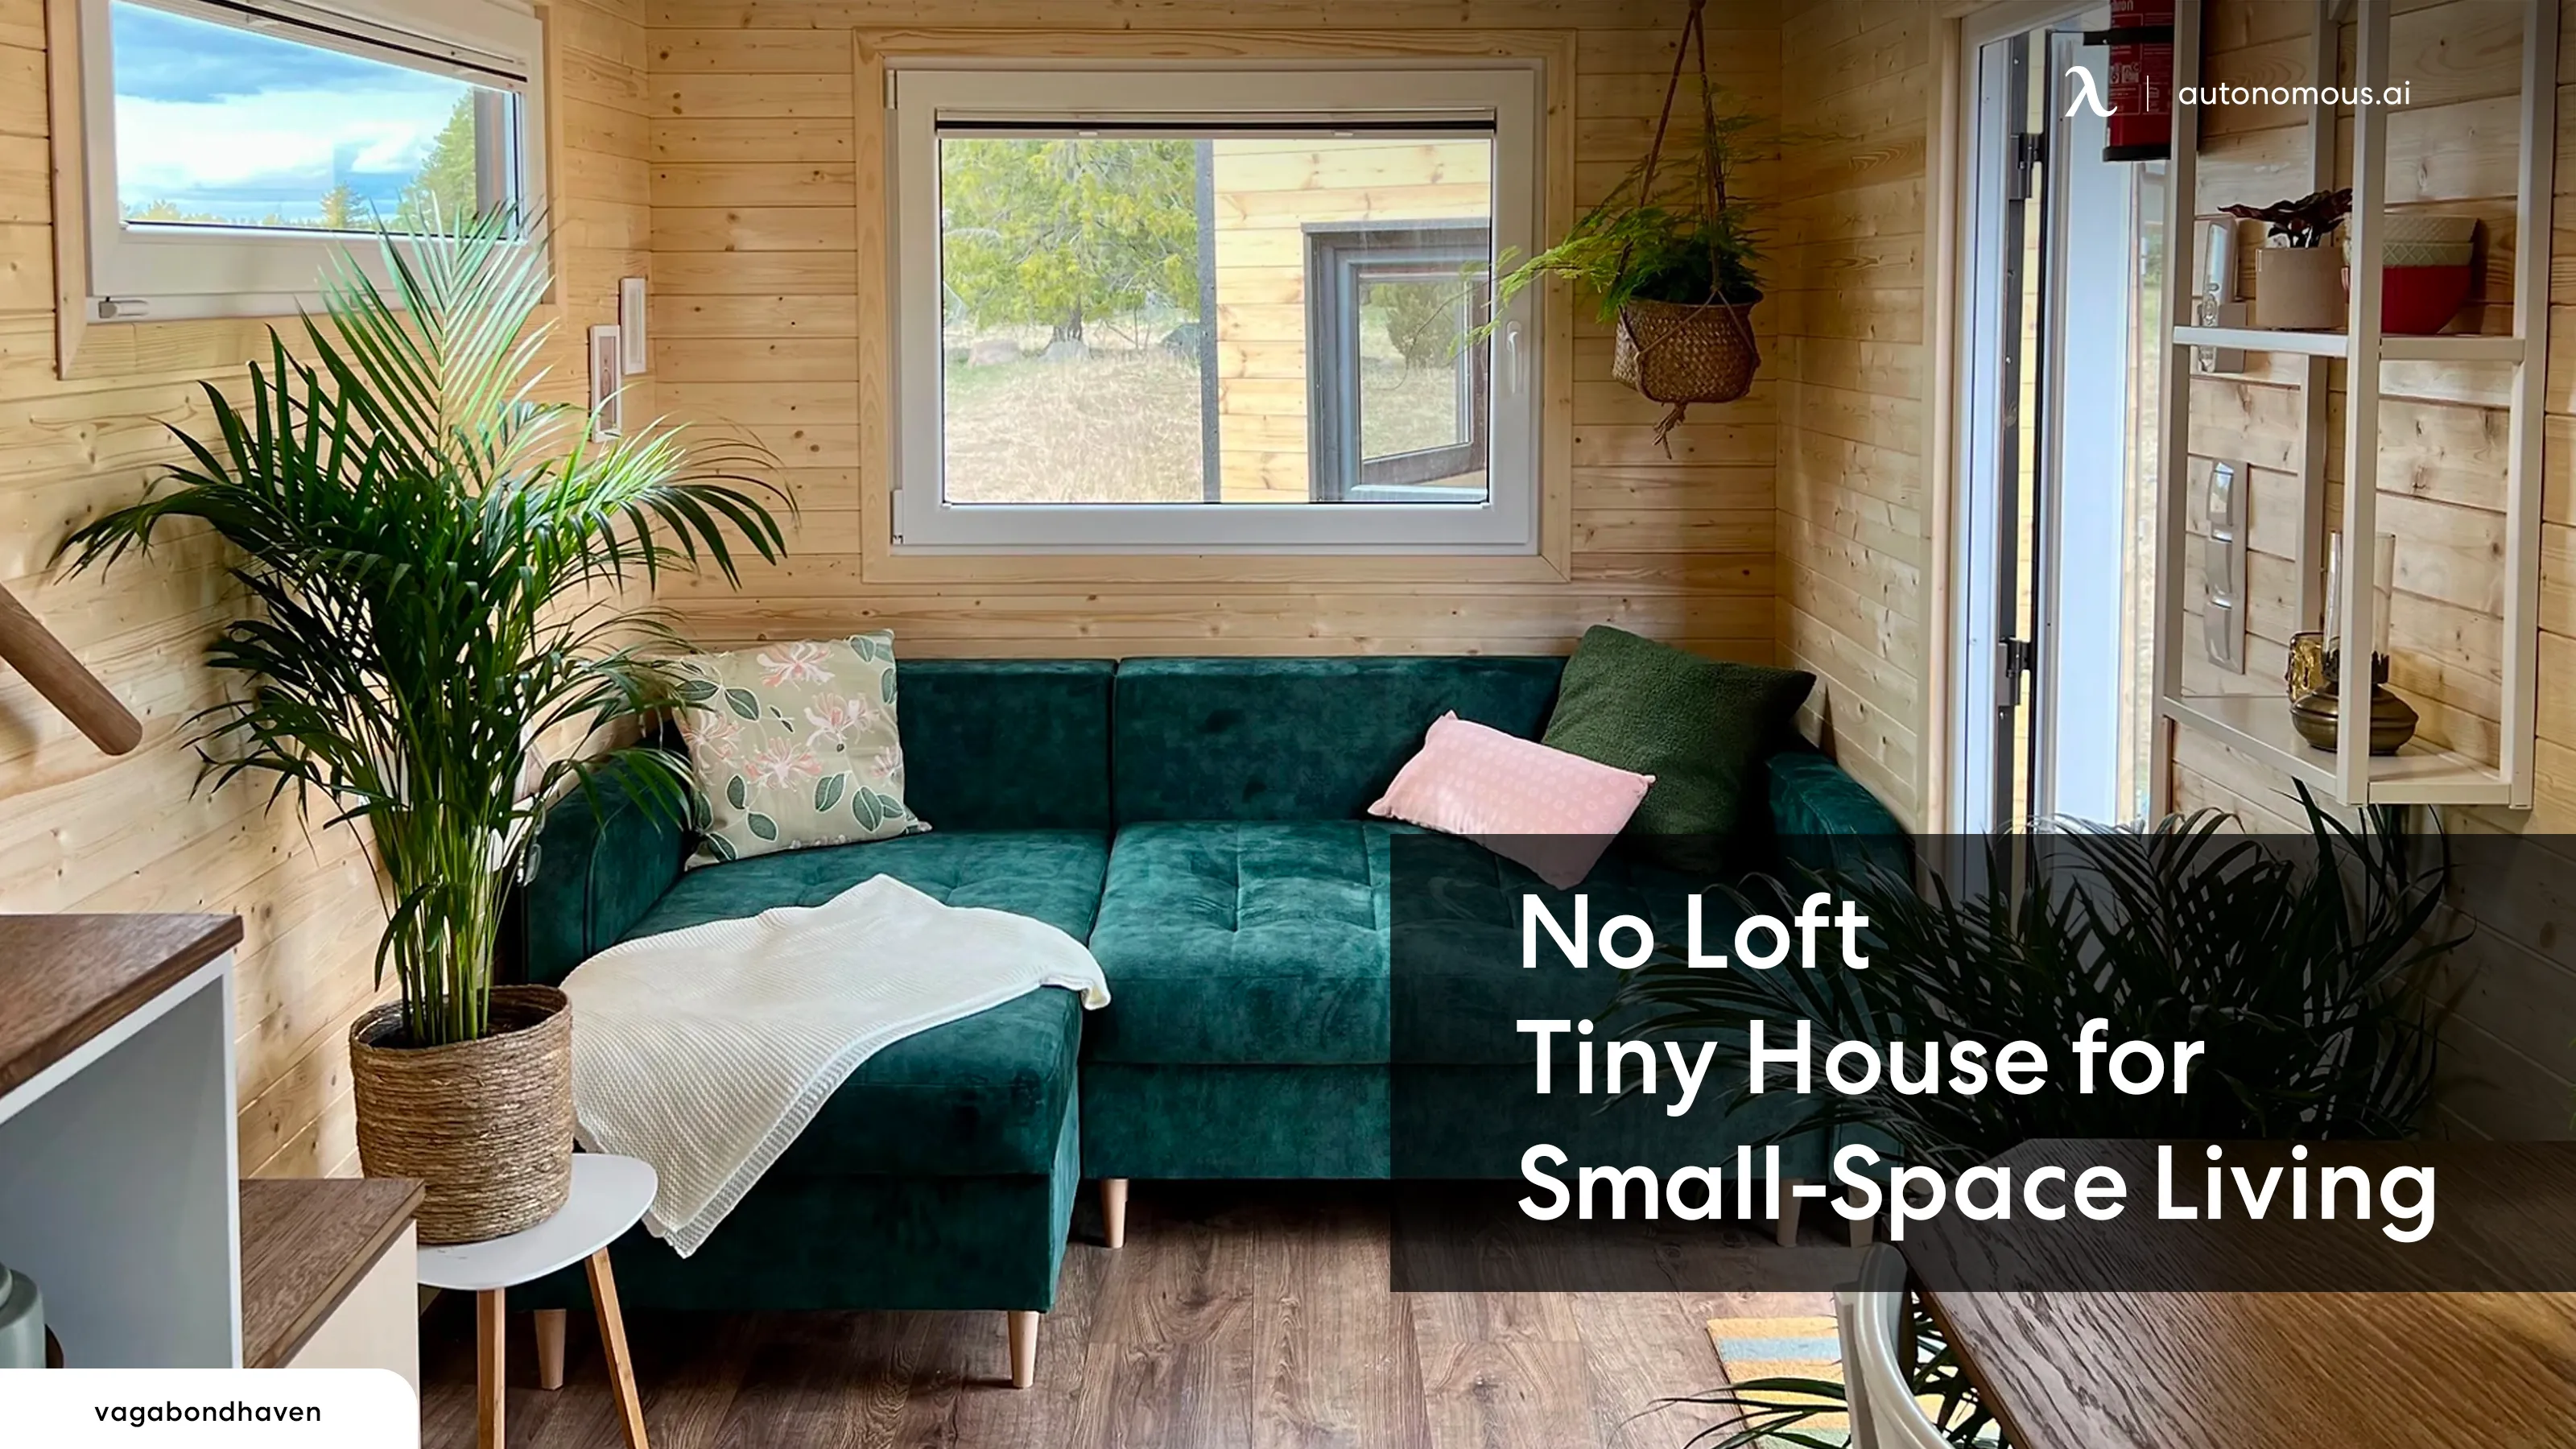 No Loft Tiny House: A Practical Solution for Small-Space Living